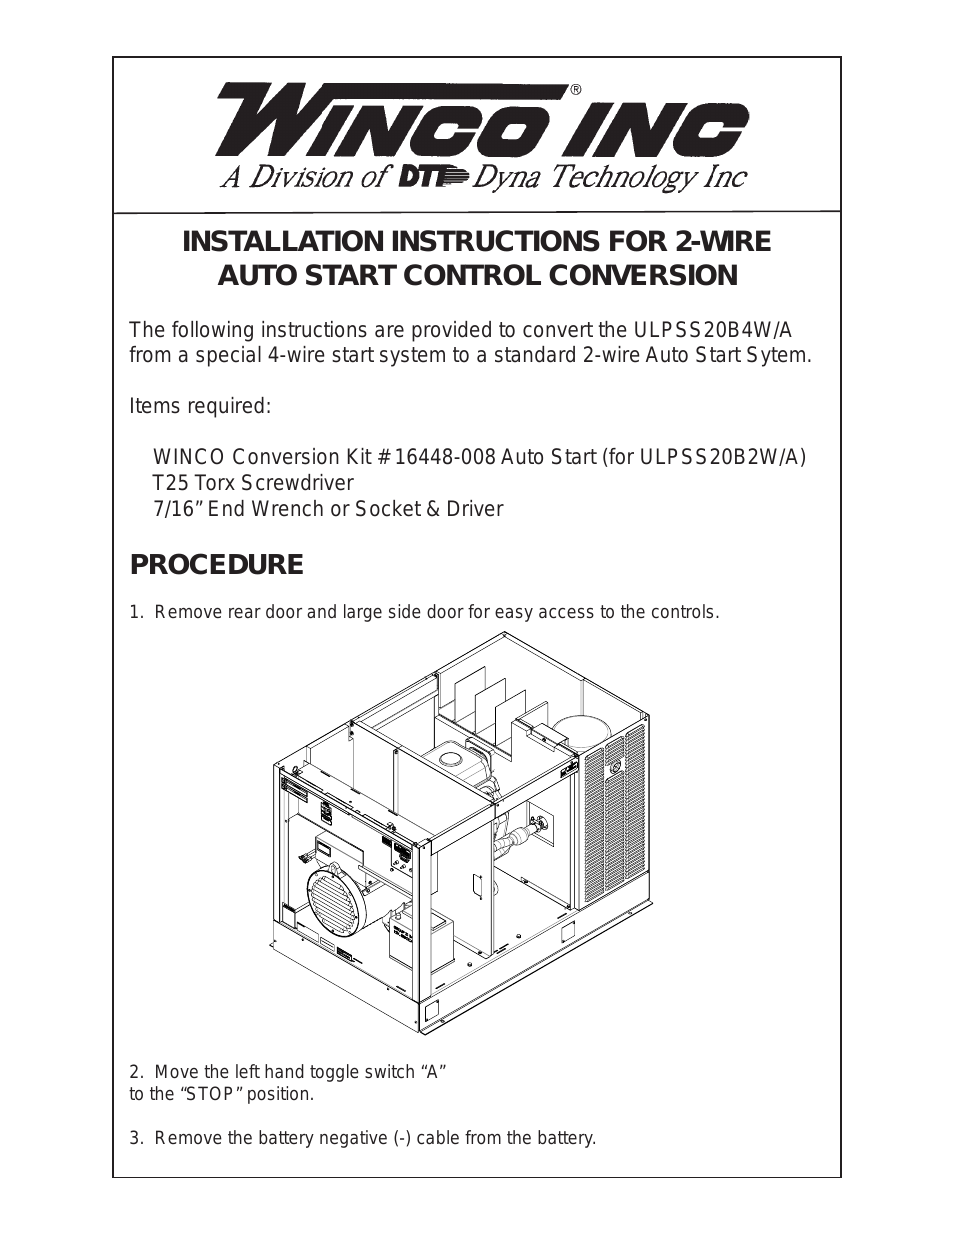 2-Wire Conversion Instructions ULPSS20B2W/A